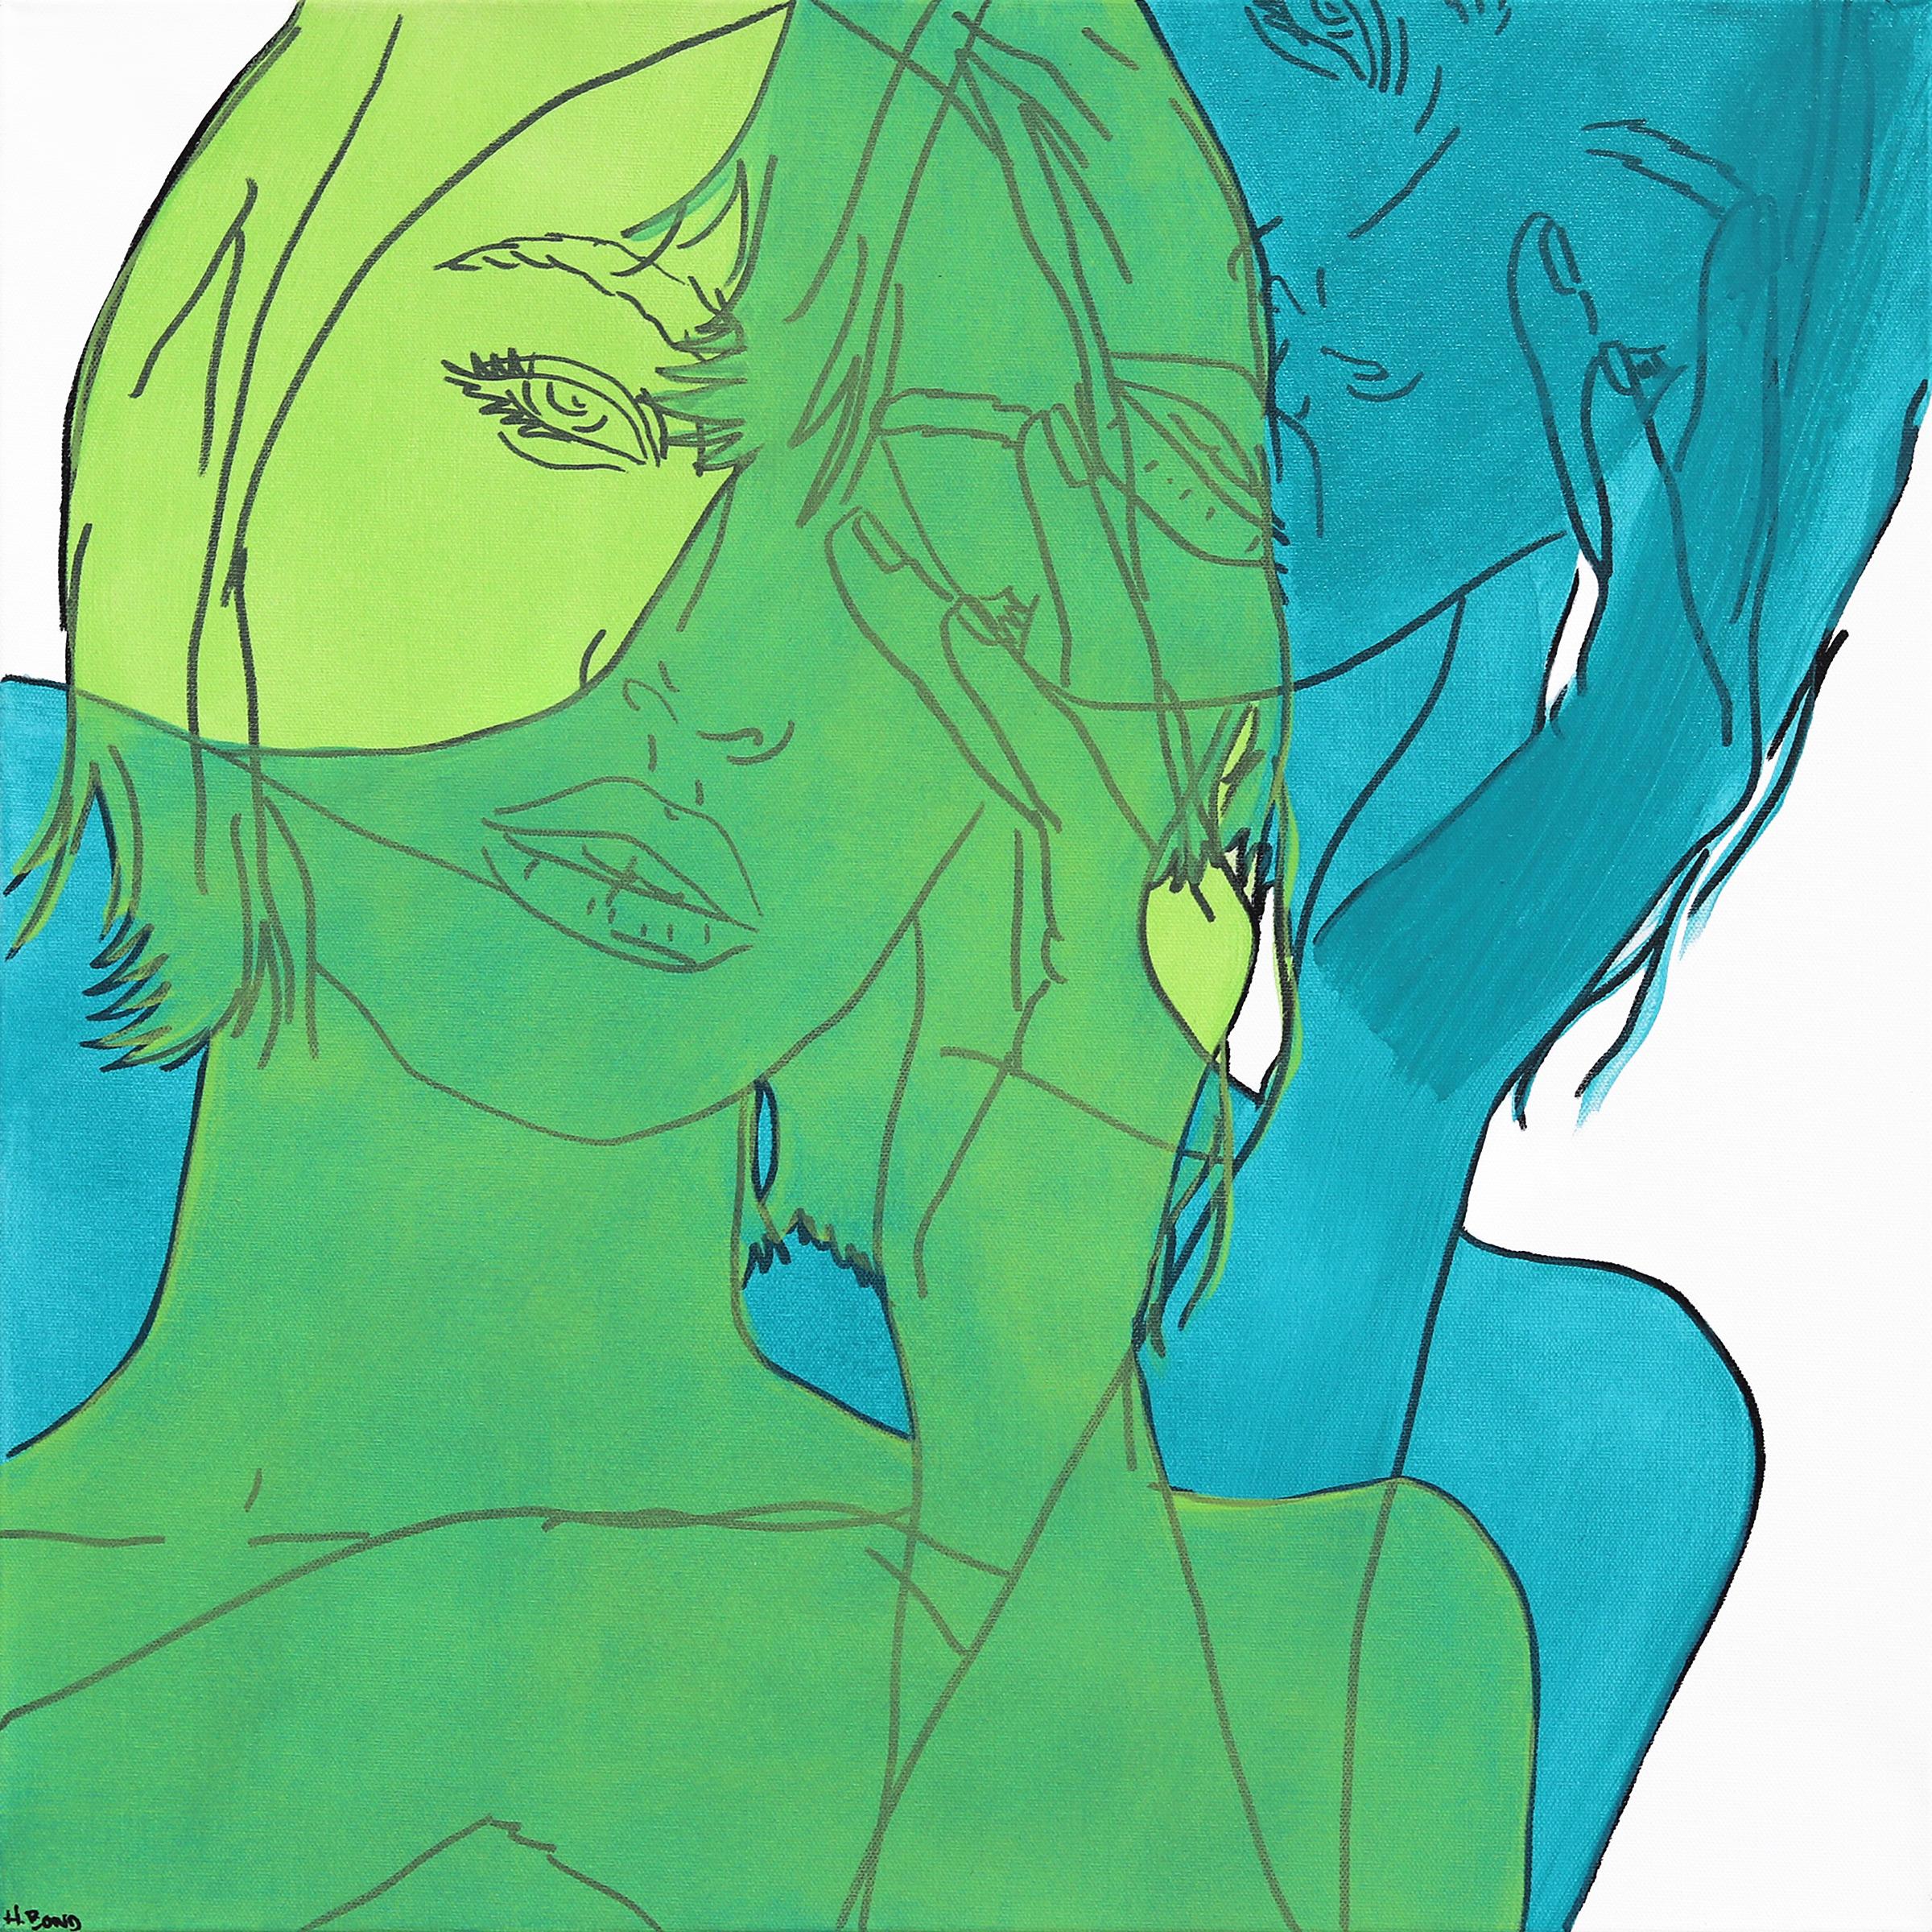 Untitled (Spring I) - Figurative Portrait Green and Blue Woman Pop Art Painting